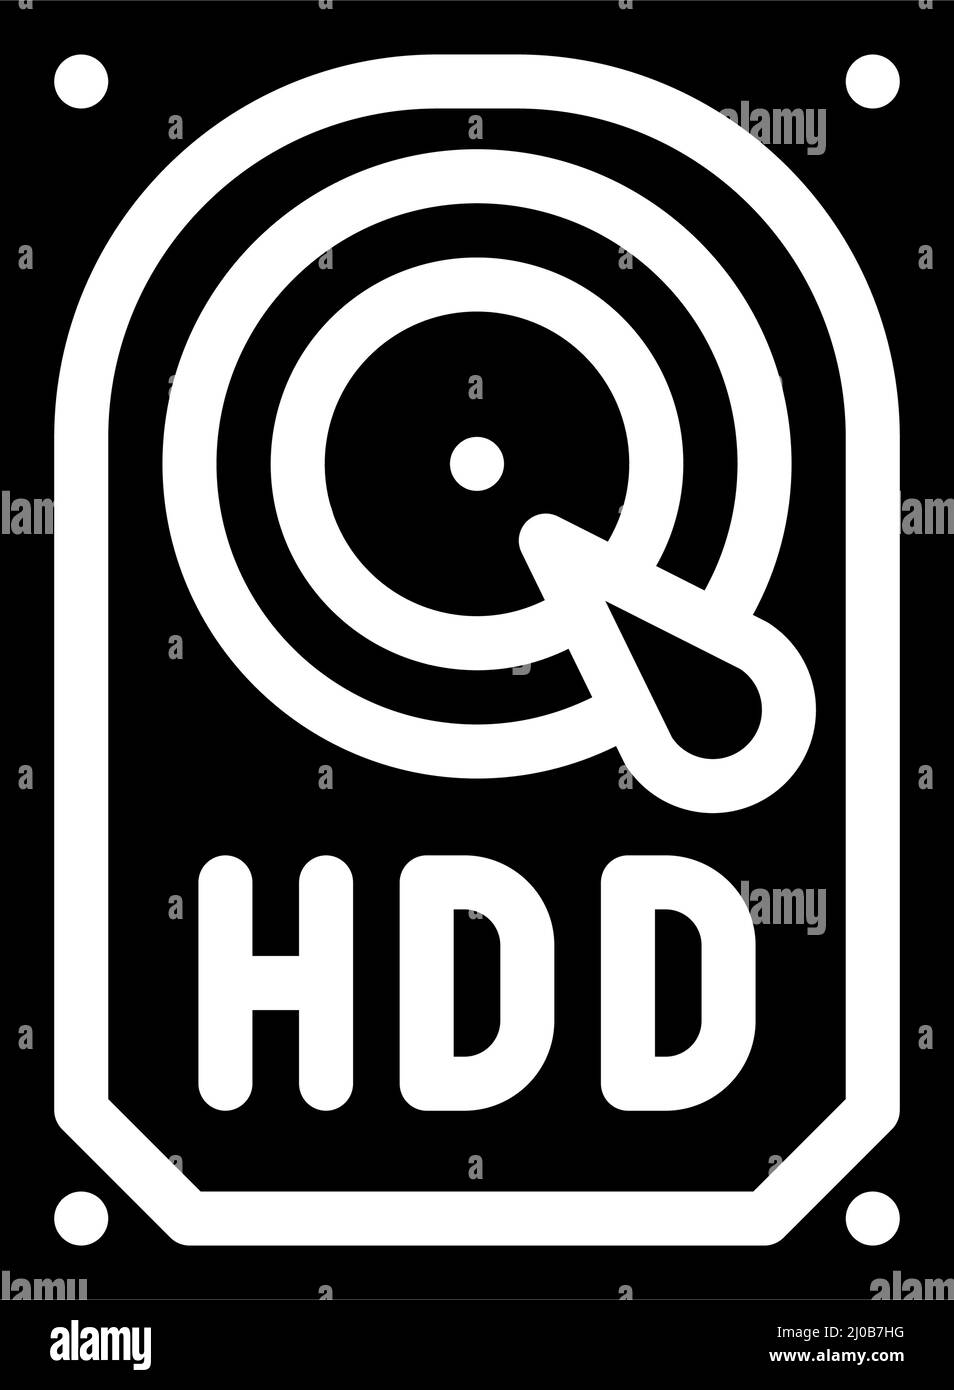 hdd computer part glyph icon vector illustration Stock Vector